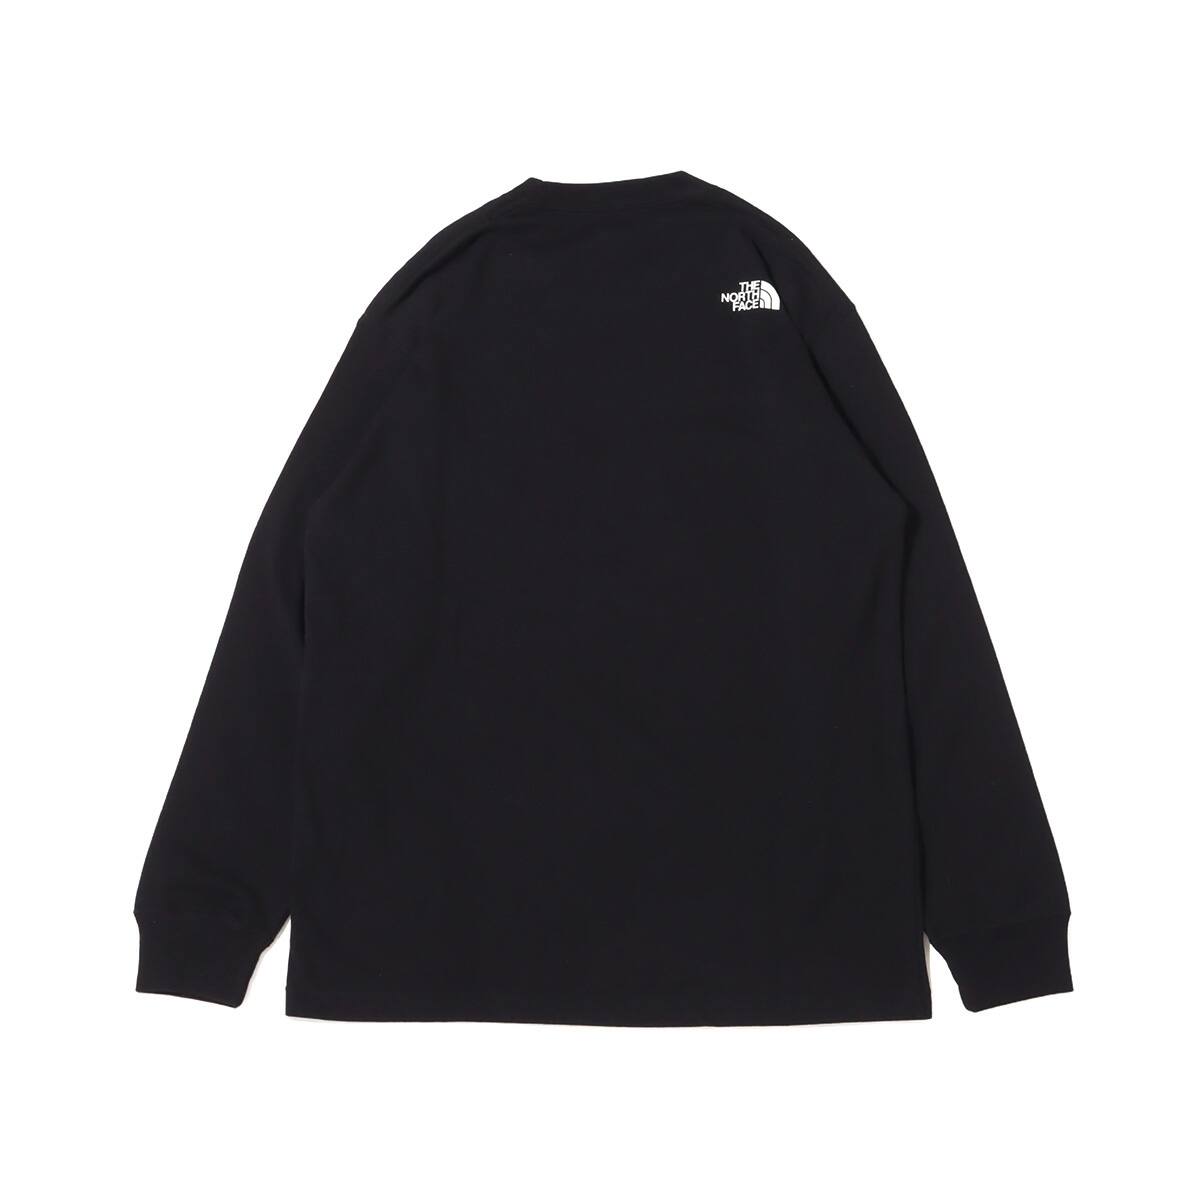 THE NORTH FACE L/S FLOWER LOGO TEE BLACK 23FW-I